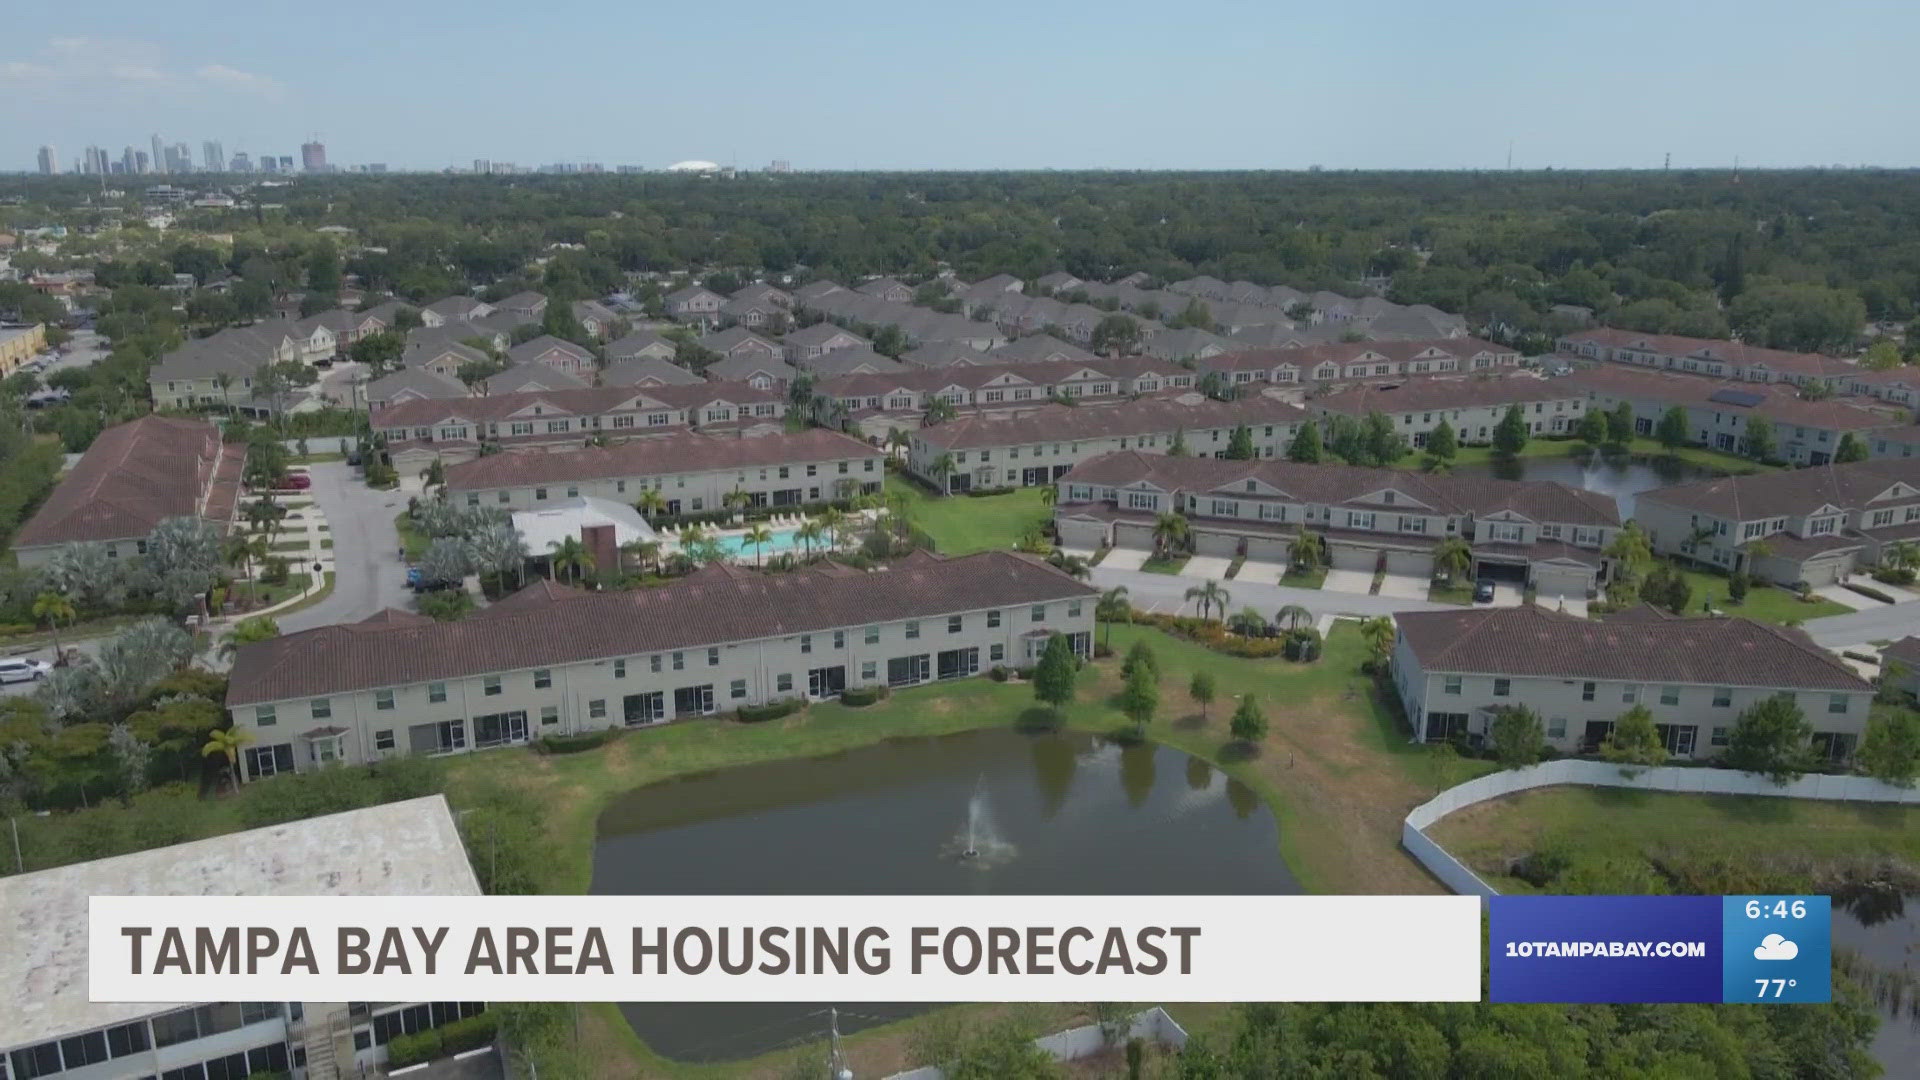 Community leaders are pushing for more affordable housing as the state could need more than half a million additional homes to keep up with the growing population.